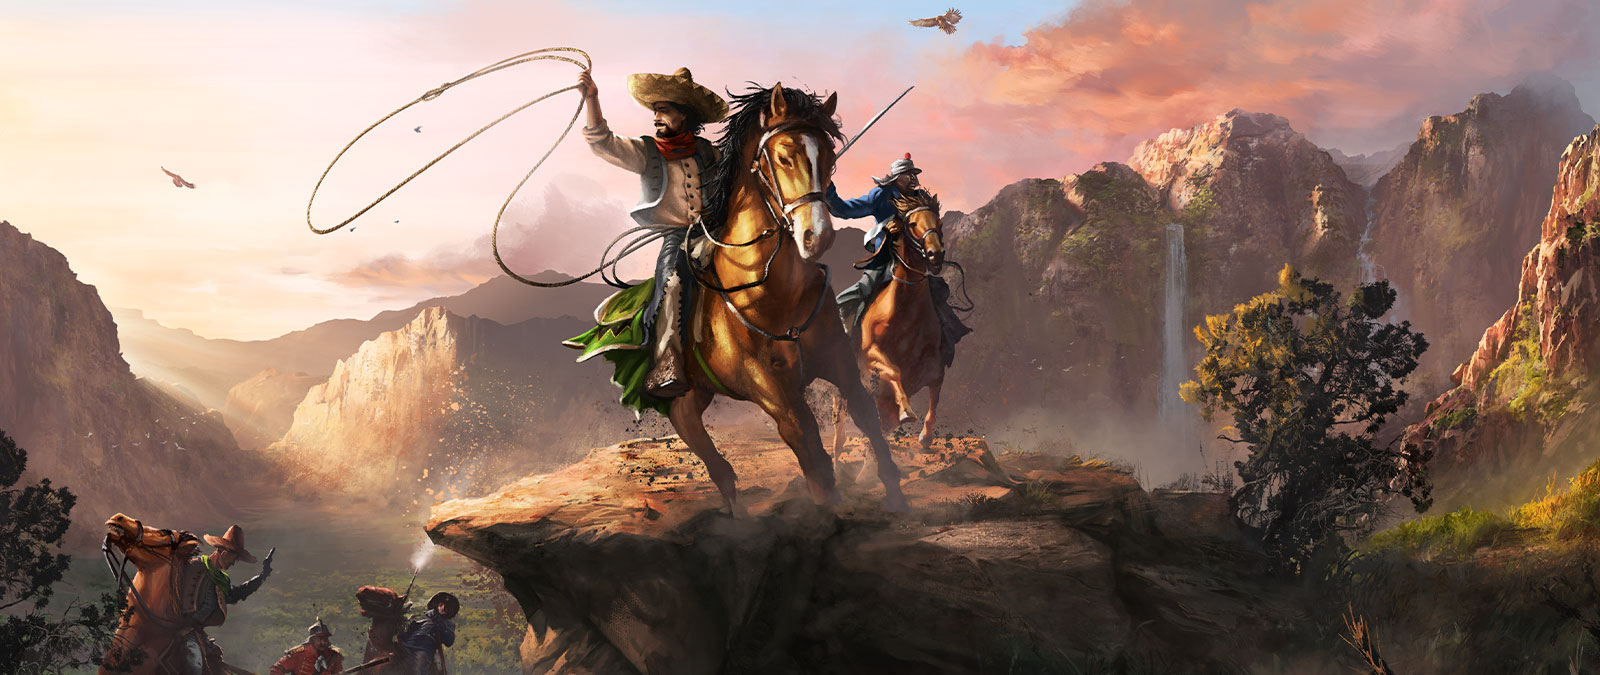 Two characters sit on their horses in a large valley carrying a lasso and a sword.